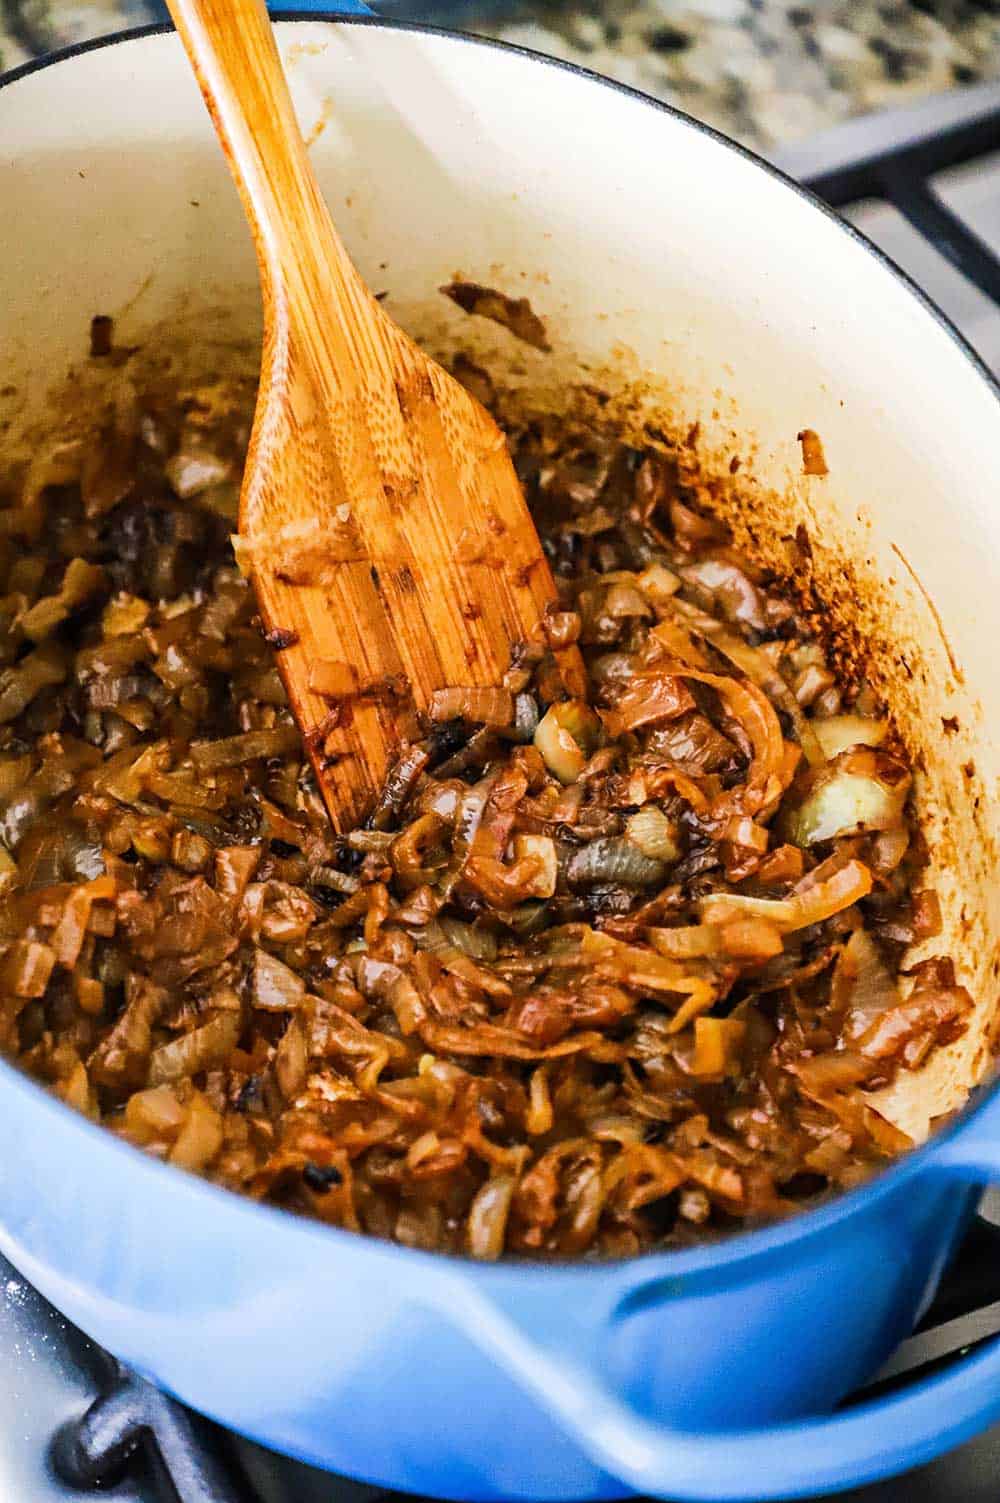 A large blue oval Dutch oven filled with caramelized onions with a wooden spatula inserted into the pot.